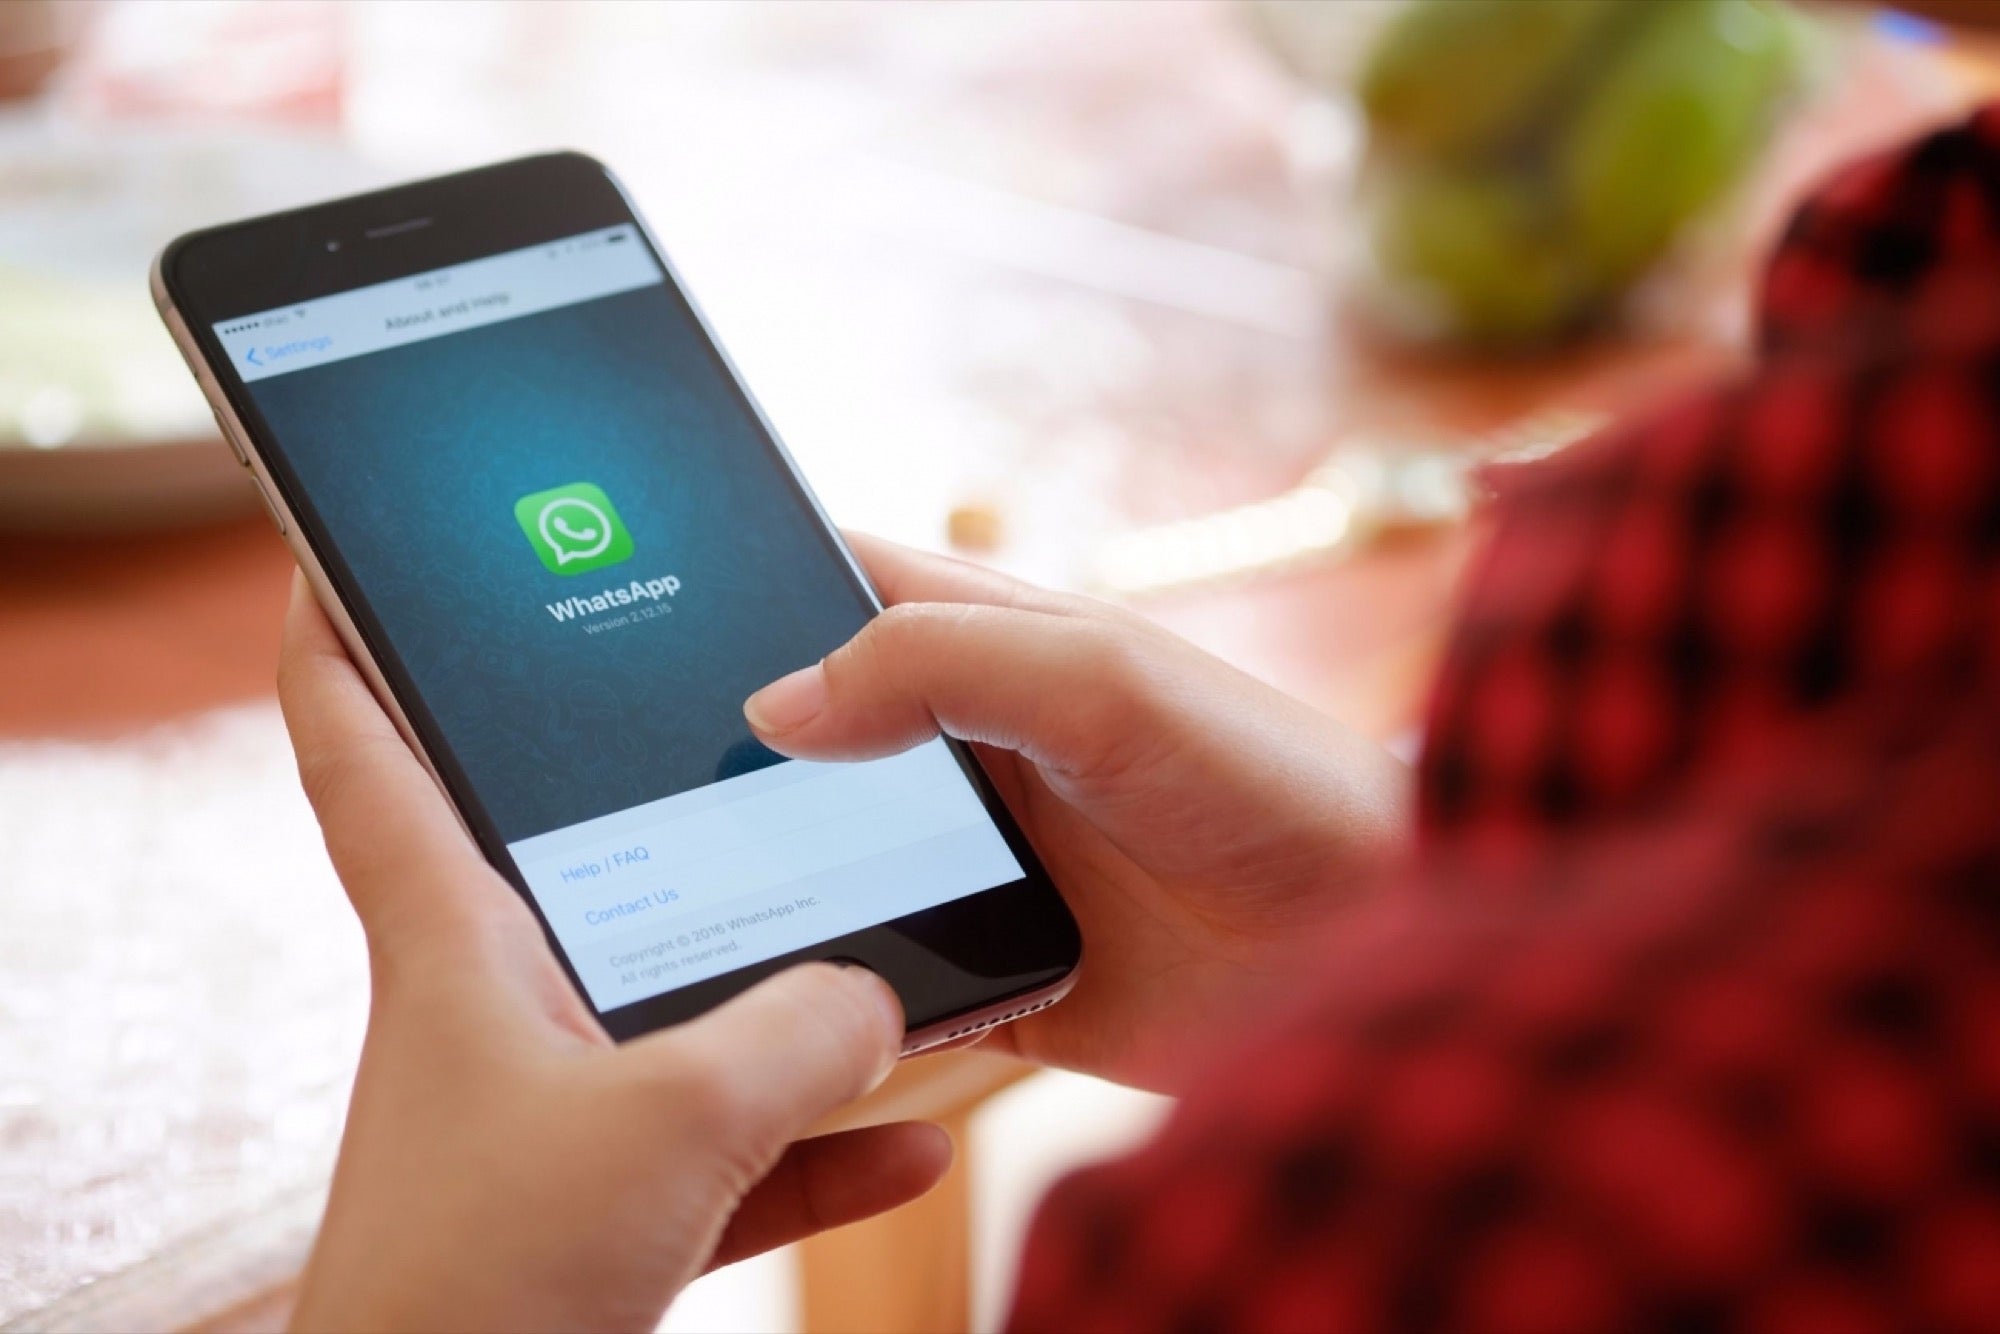 A hand using phone and whatsapp logo is on screen